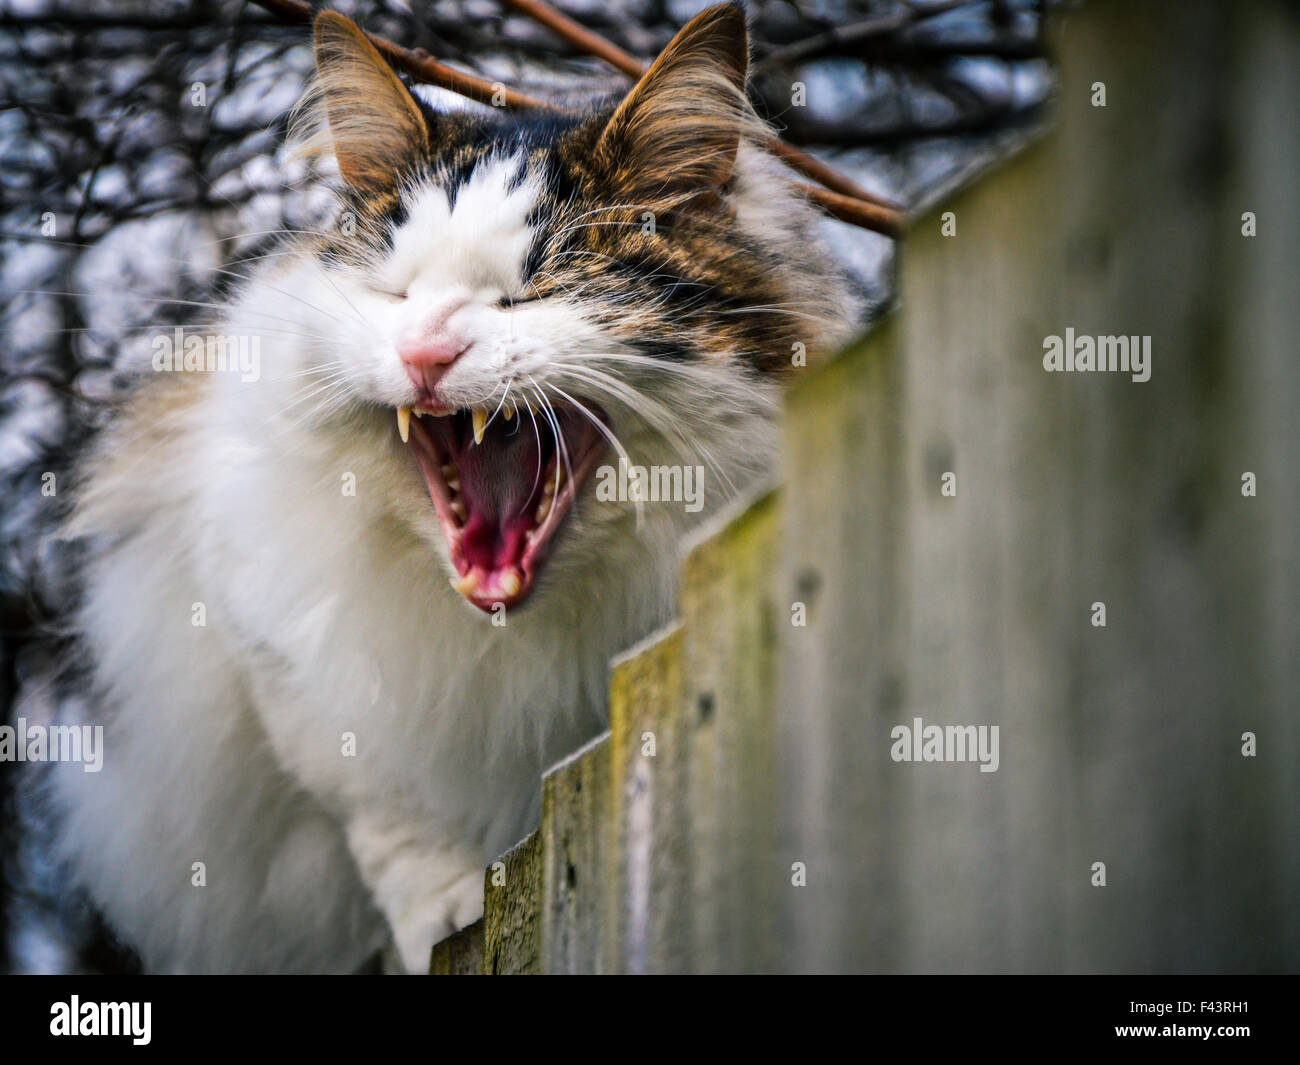 Not-a-morning cat is unamused by your morning camera visit. Stock Photo